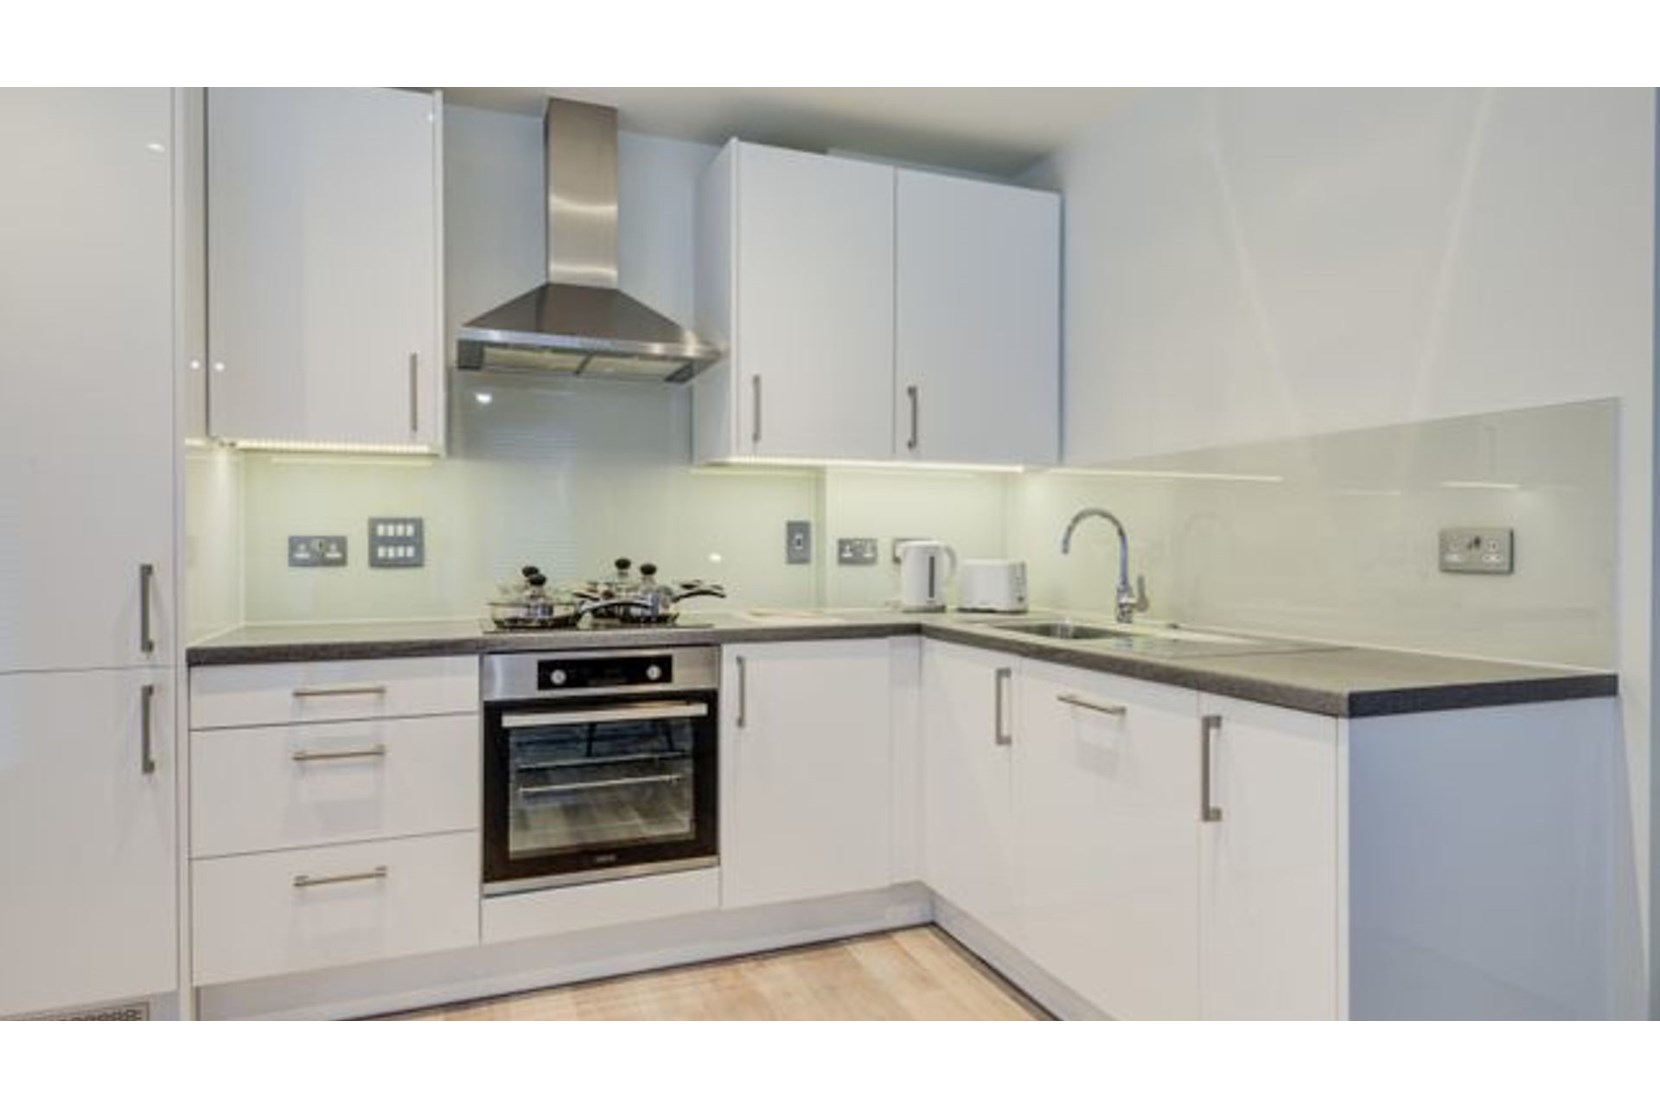 Apartments to Rent by Hera at Hornchurch, Havering, RM11, kitchen